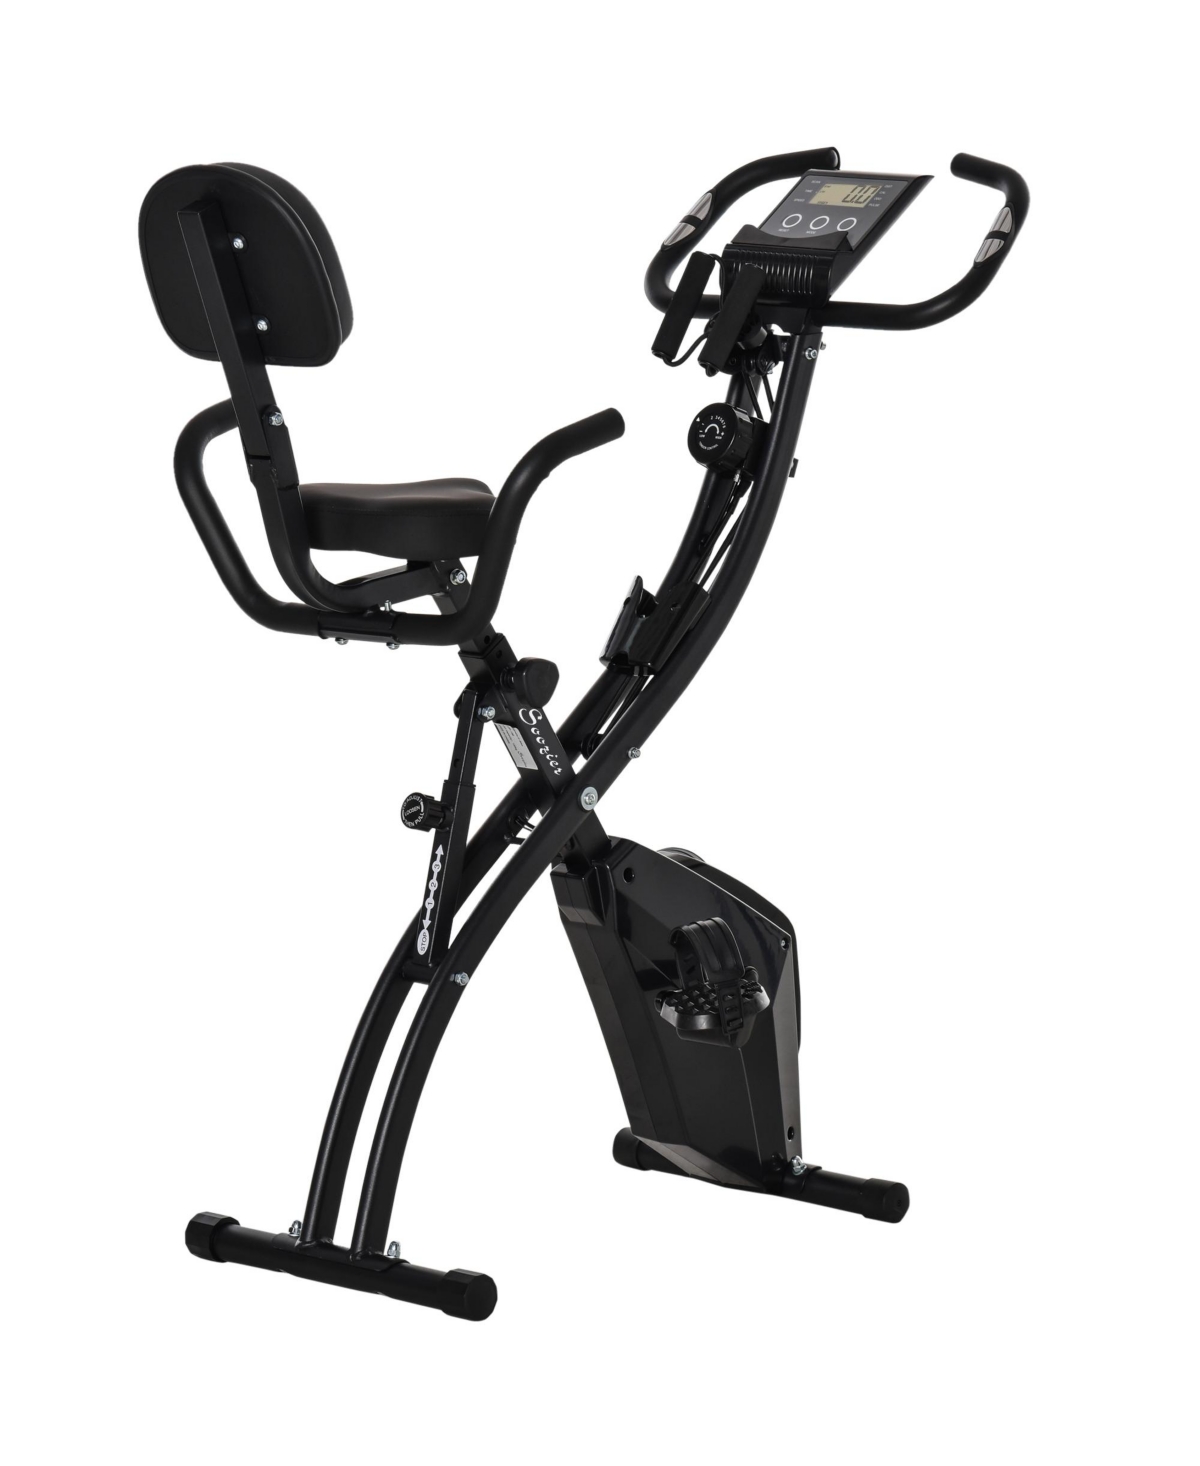 2 in 1 Exercise Bike with Arm Resistance Bands for Upright and Recumbent Cycling, Black - Black